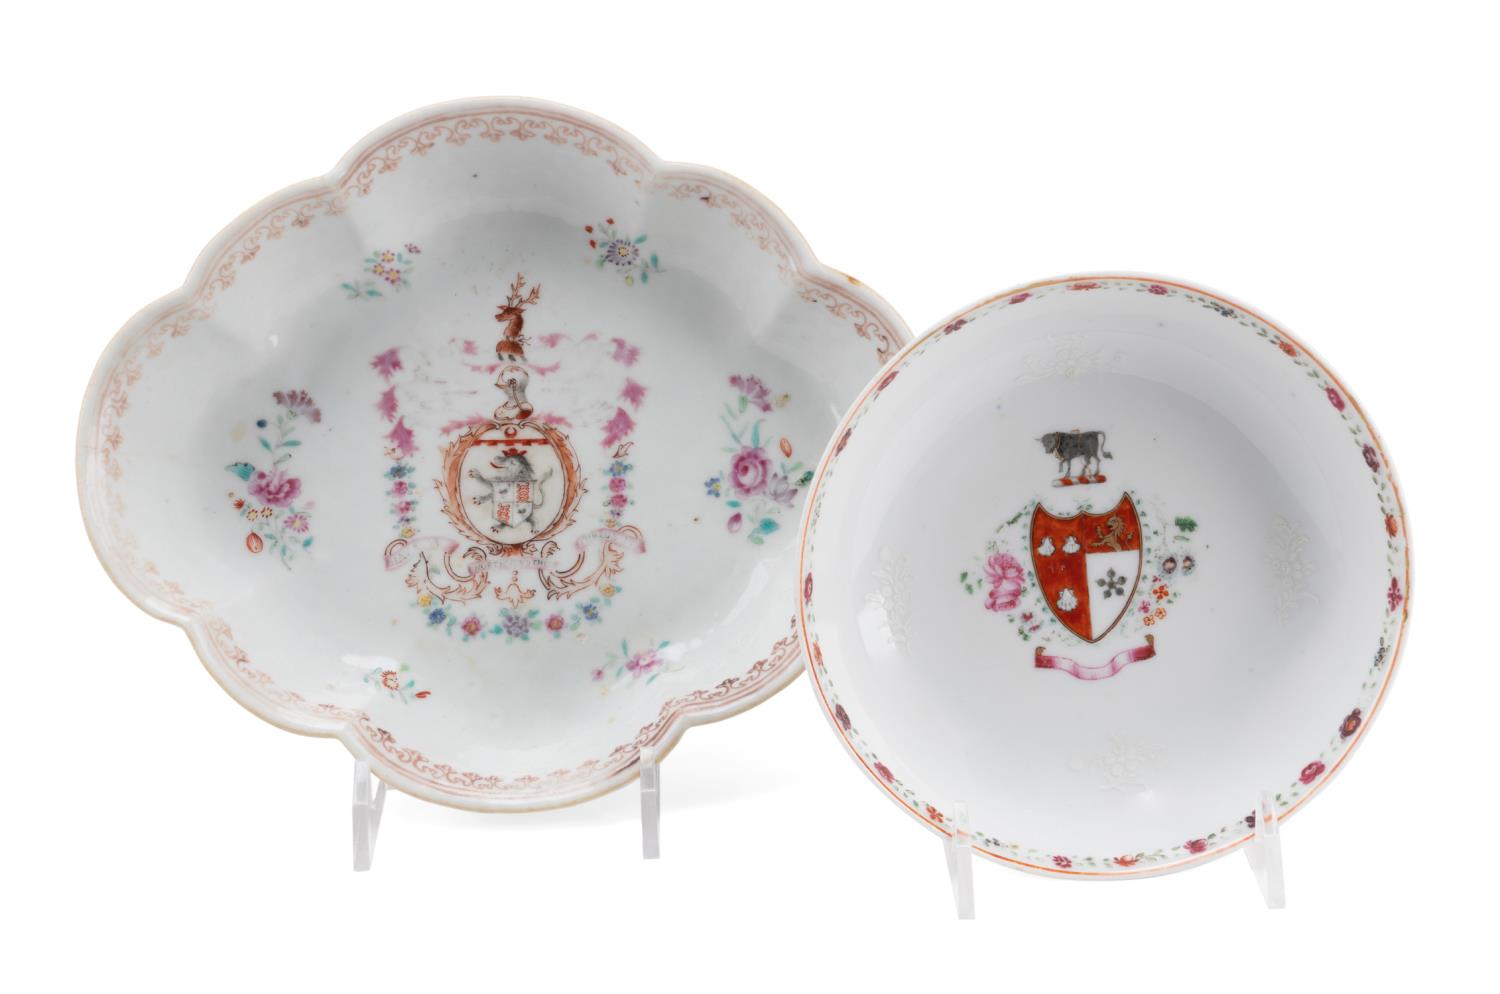 2PCS CHINESE EXPORT ARMORIAL PORCELAIN 3b40f5